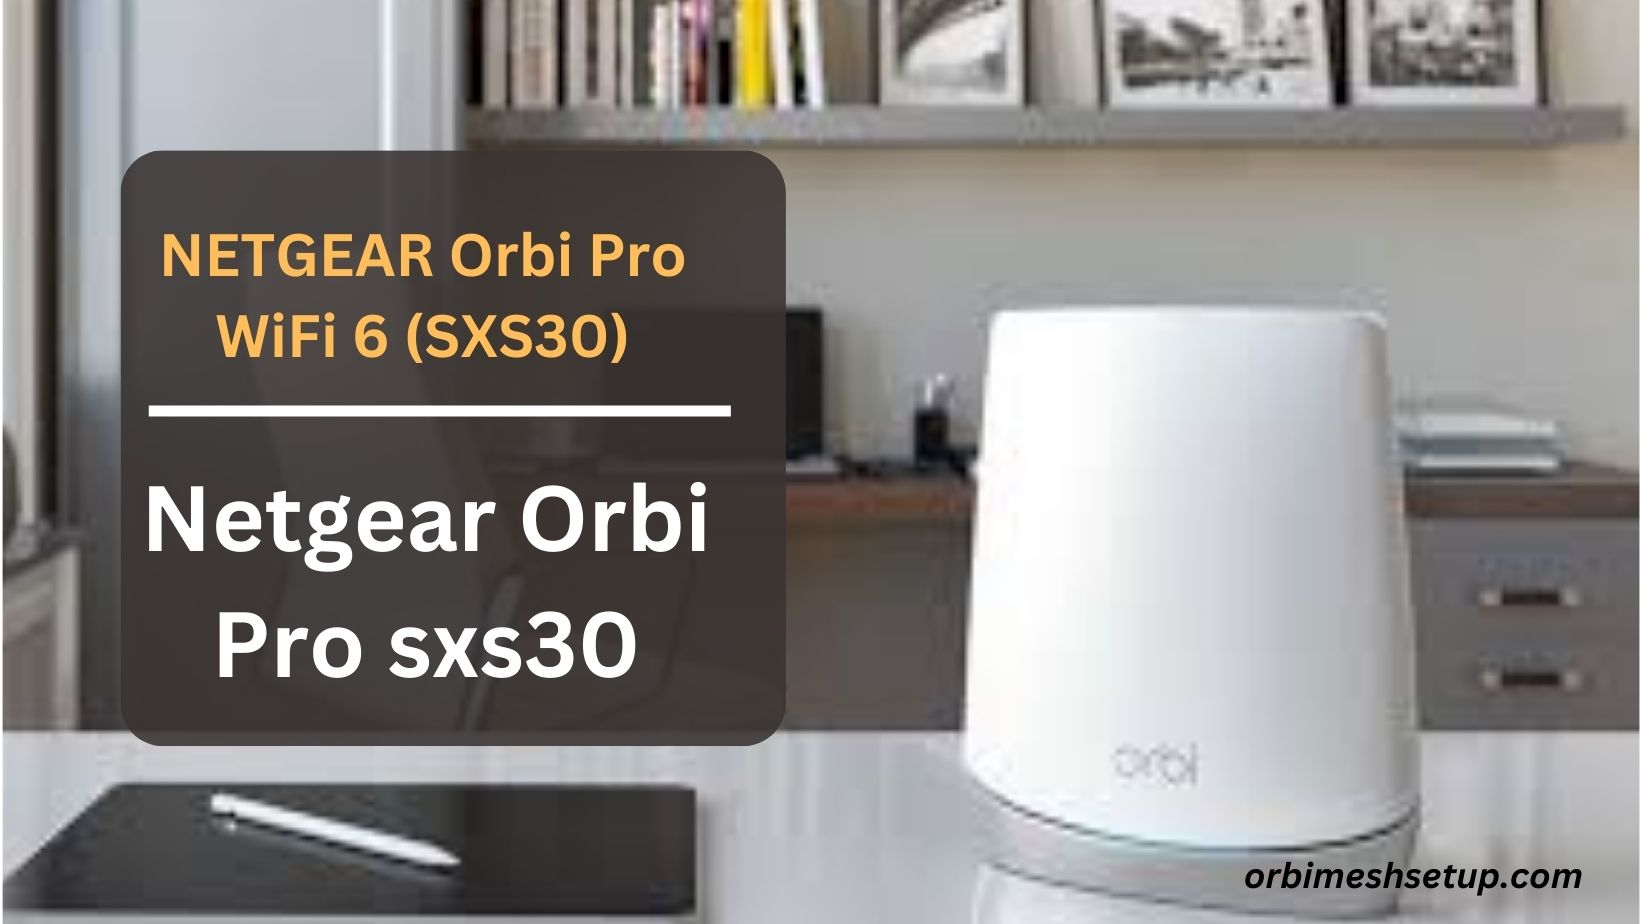 You are currently viewing NETGEAR Orbi Pro WiFi 6 (SXS30) 